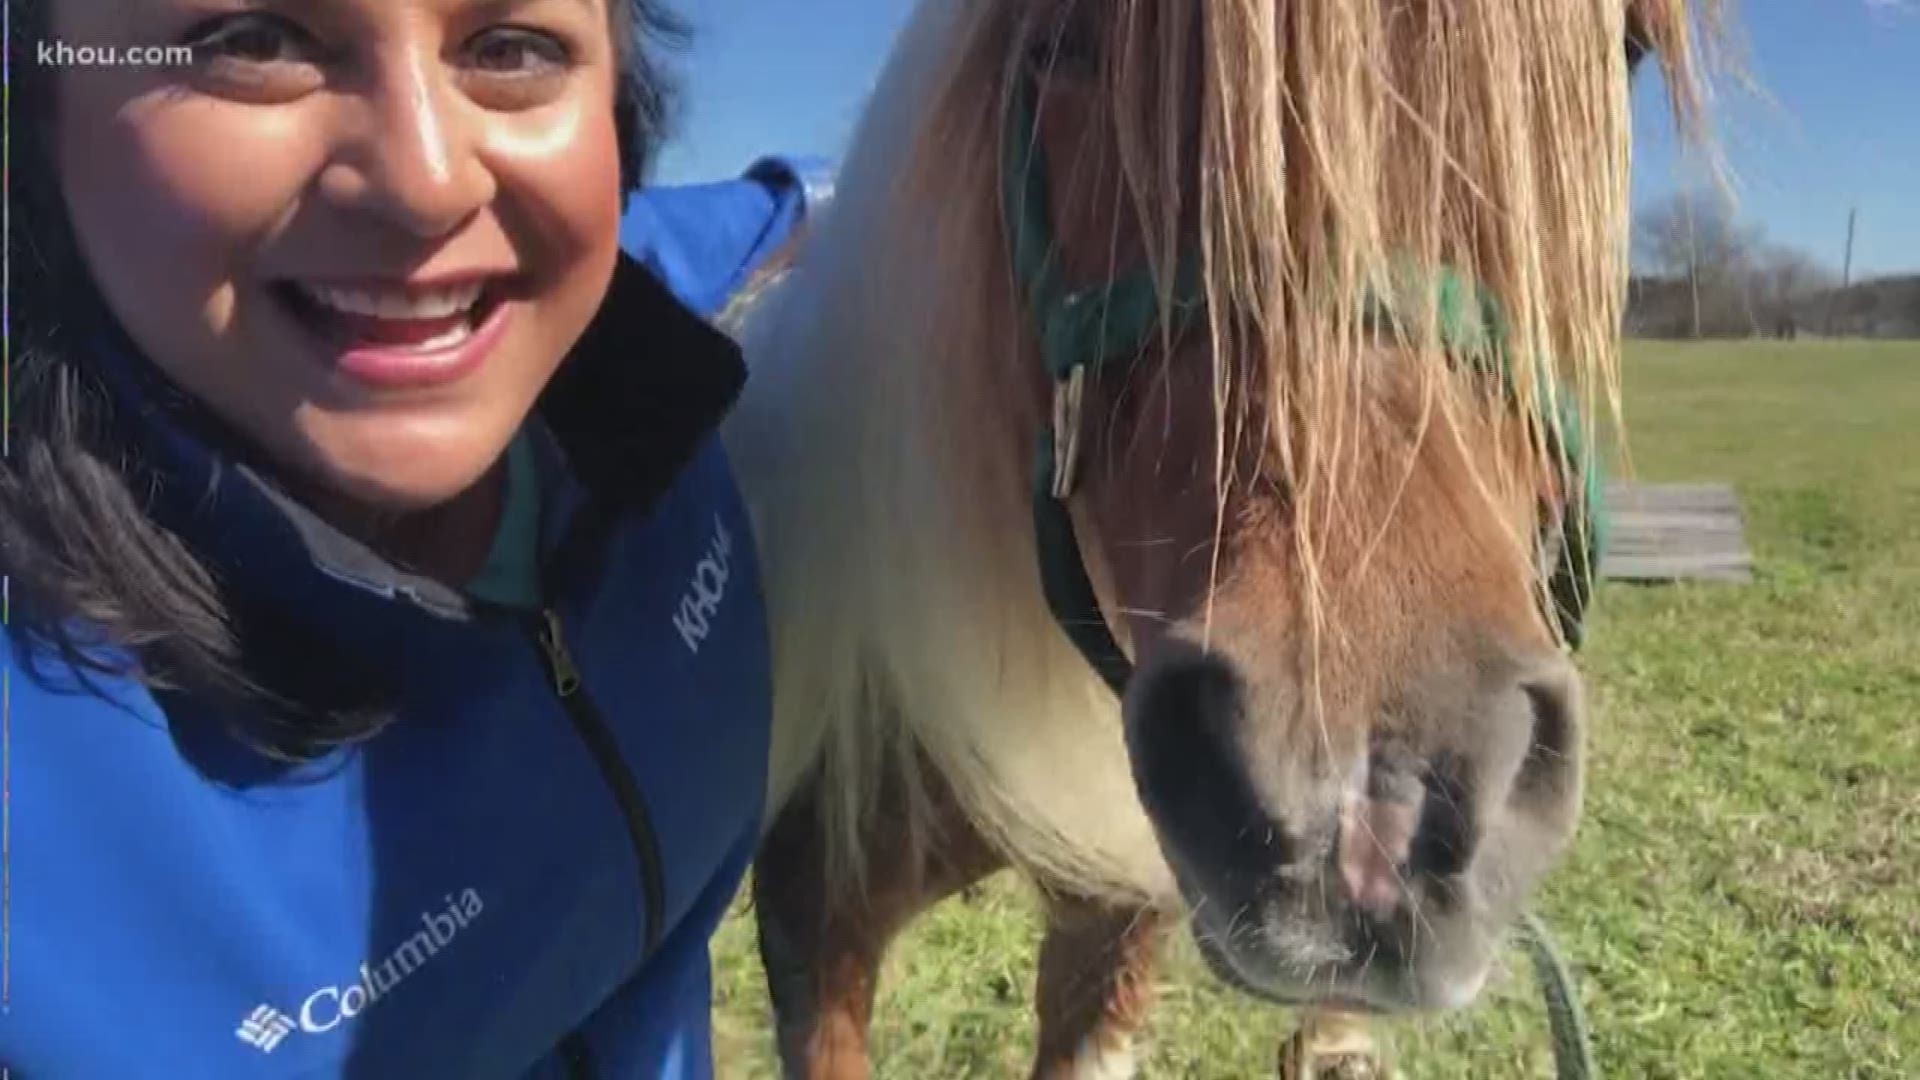 A miniature pony pulled from a storm drain back in October has joined the Harris County Sheriff's Office. KHOU 11 News reporter Melissa Correa got to meet Chief Friday.